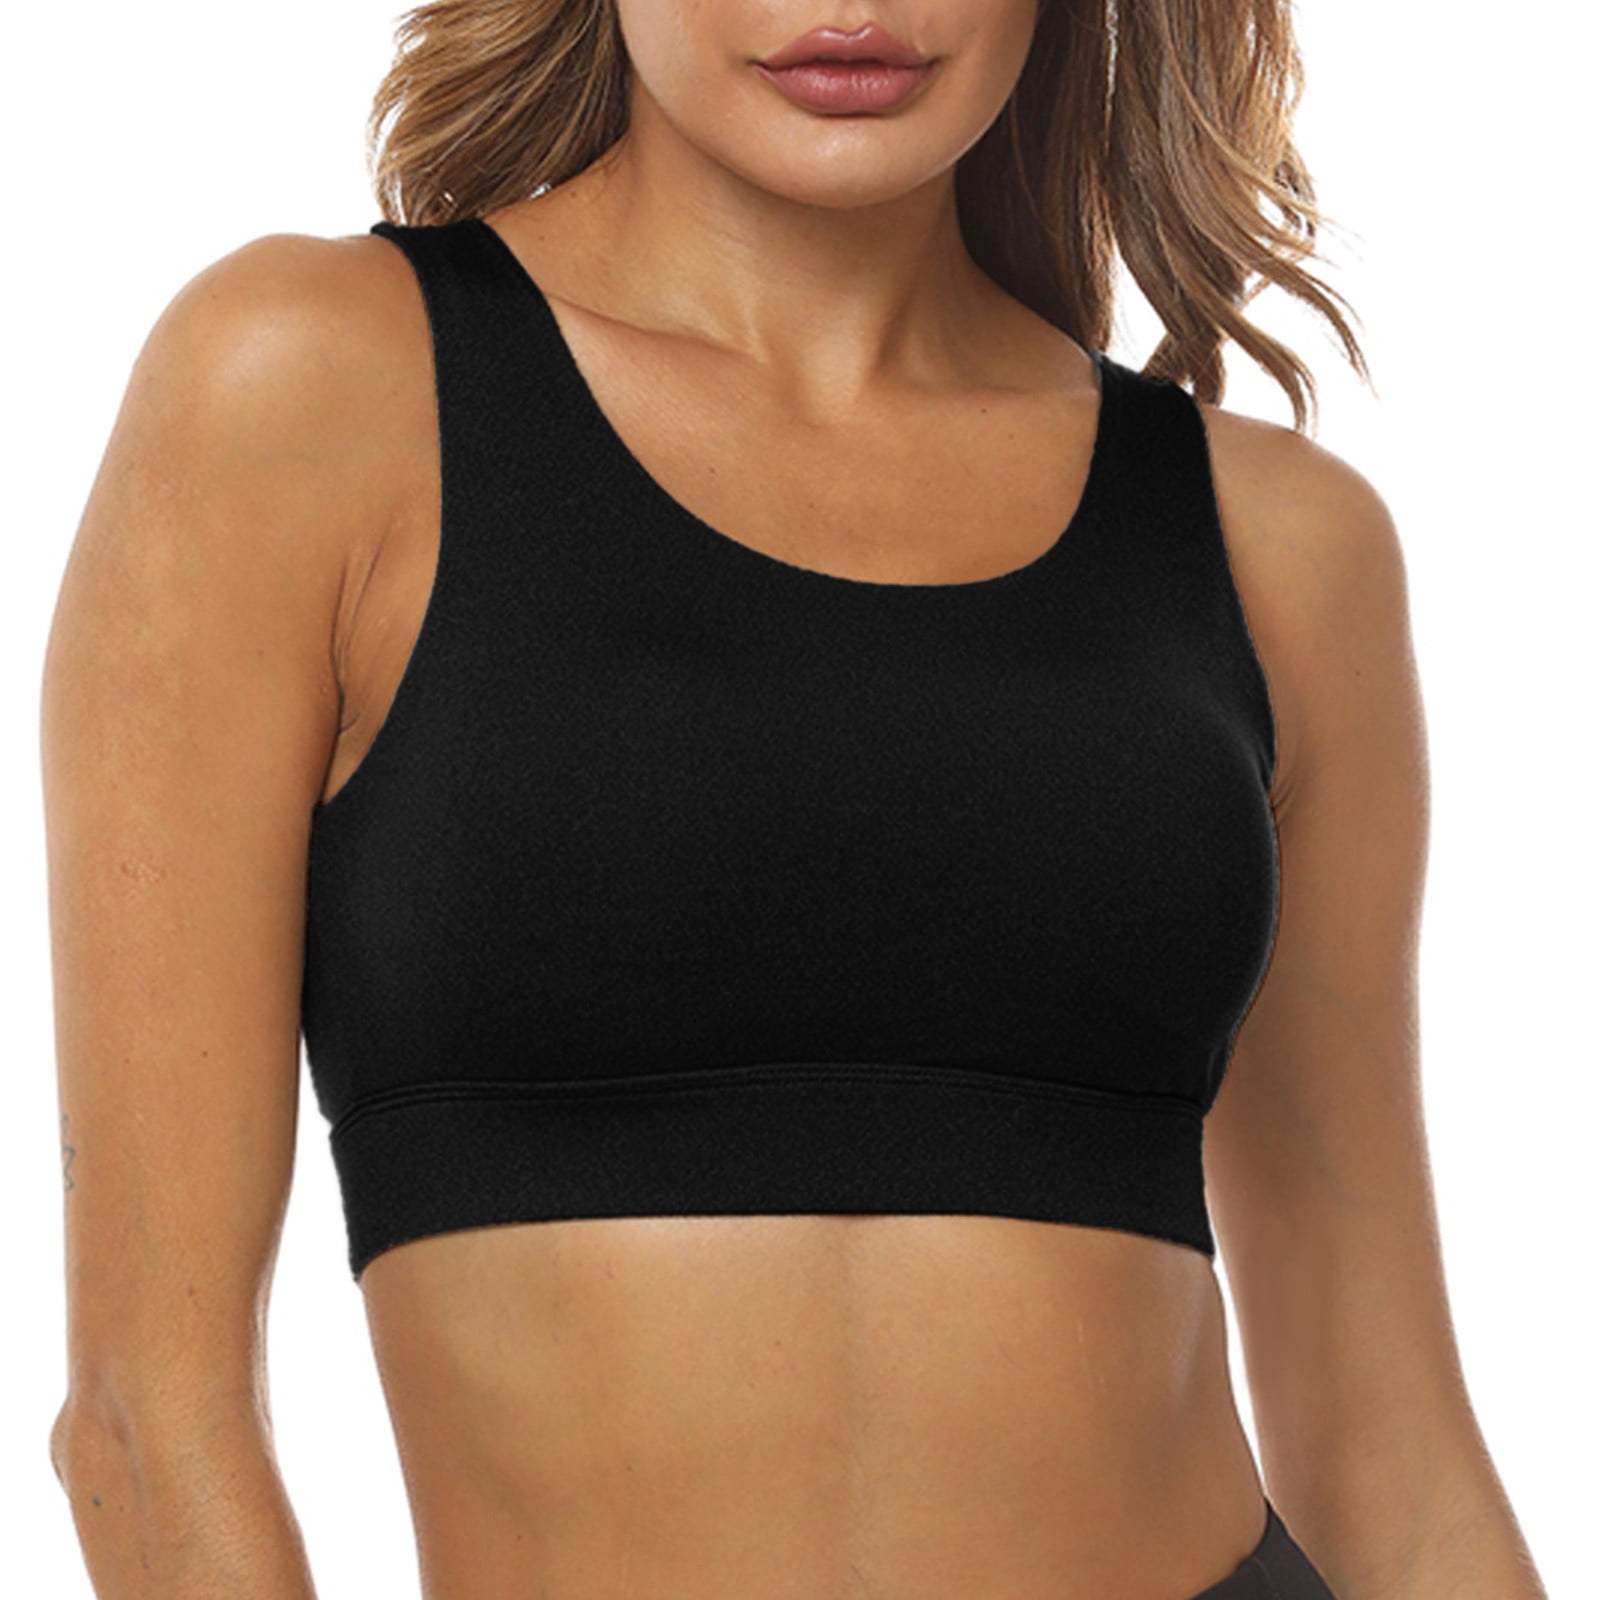 Eashery She Fit Sports Bras Women's Push Up Lace Bra Underwire Plunge Full  Coverage Bras Plus Size Support Black XX-Large